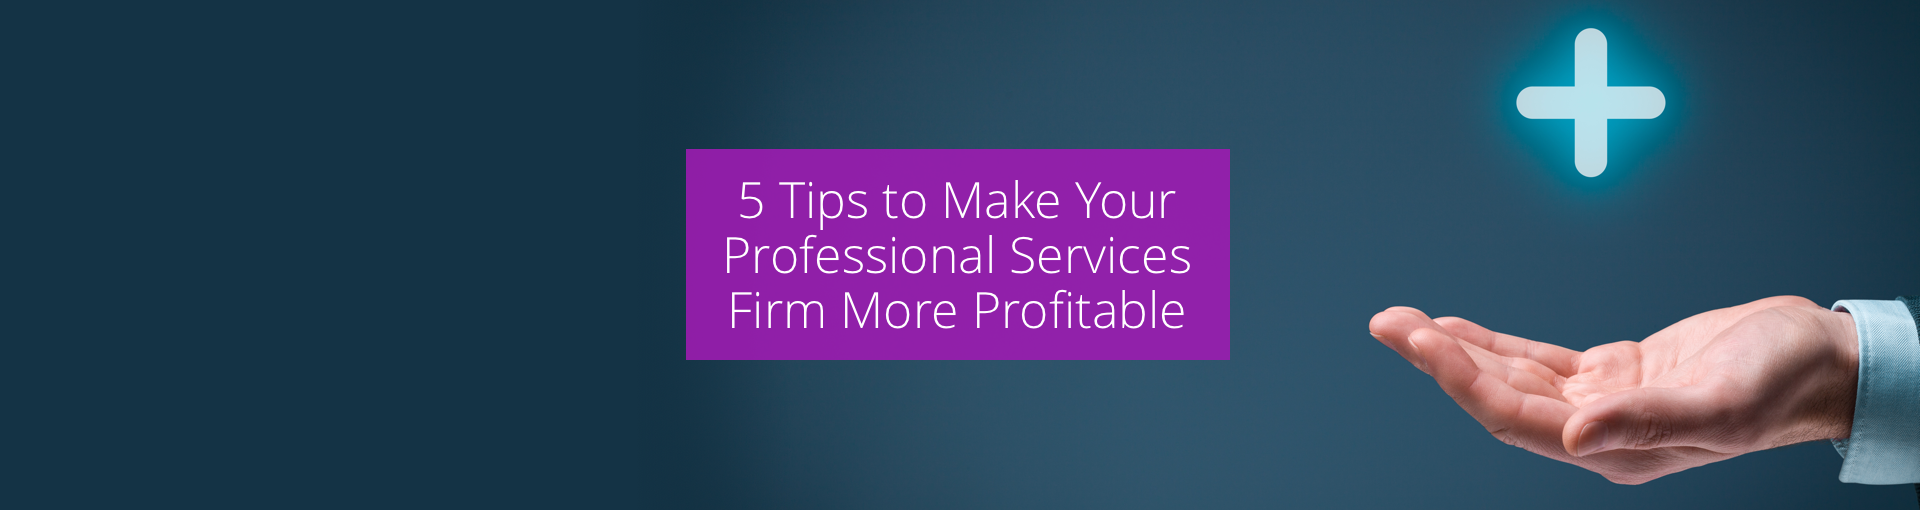 5 Tips to Make Your Professional Services Firm More Profitable Featured Image